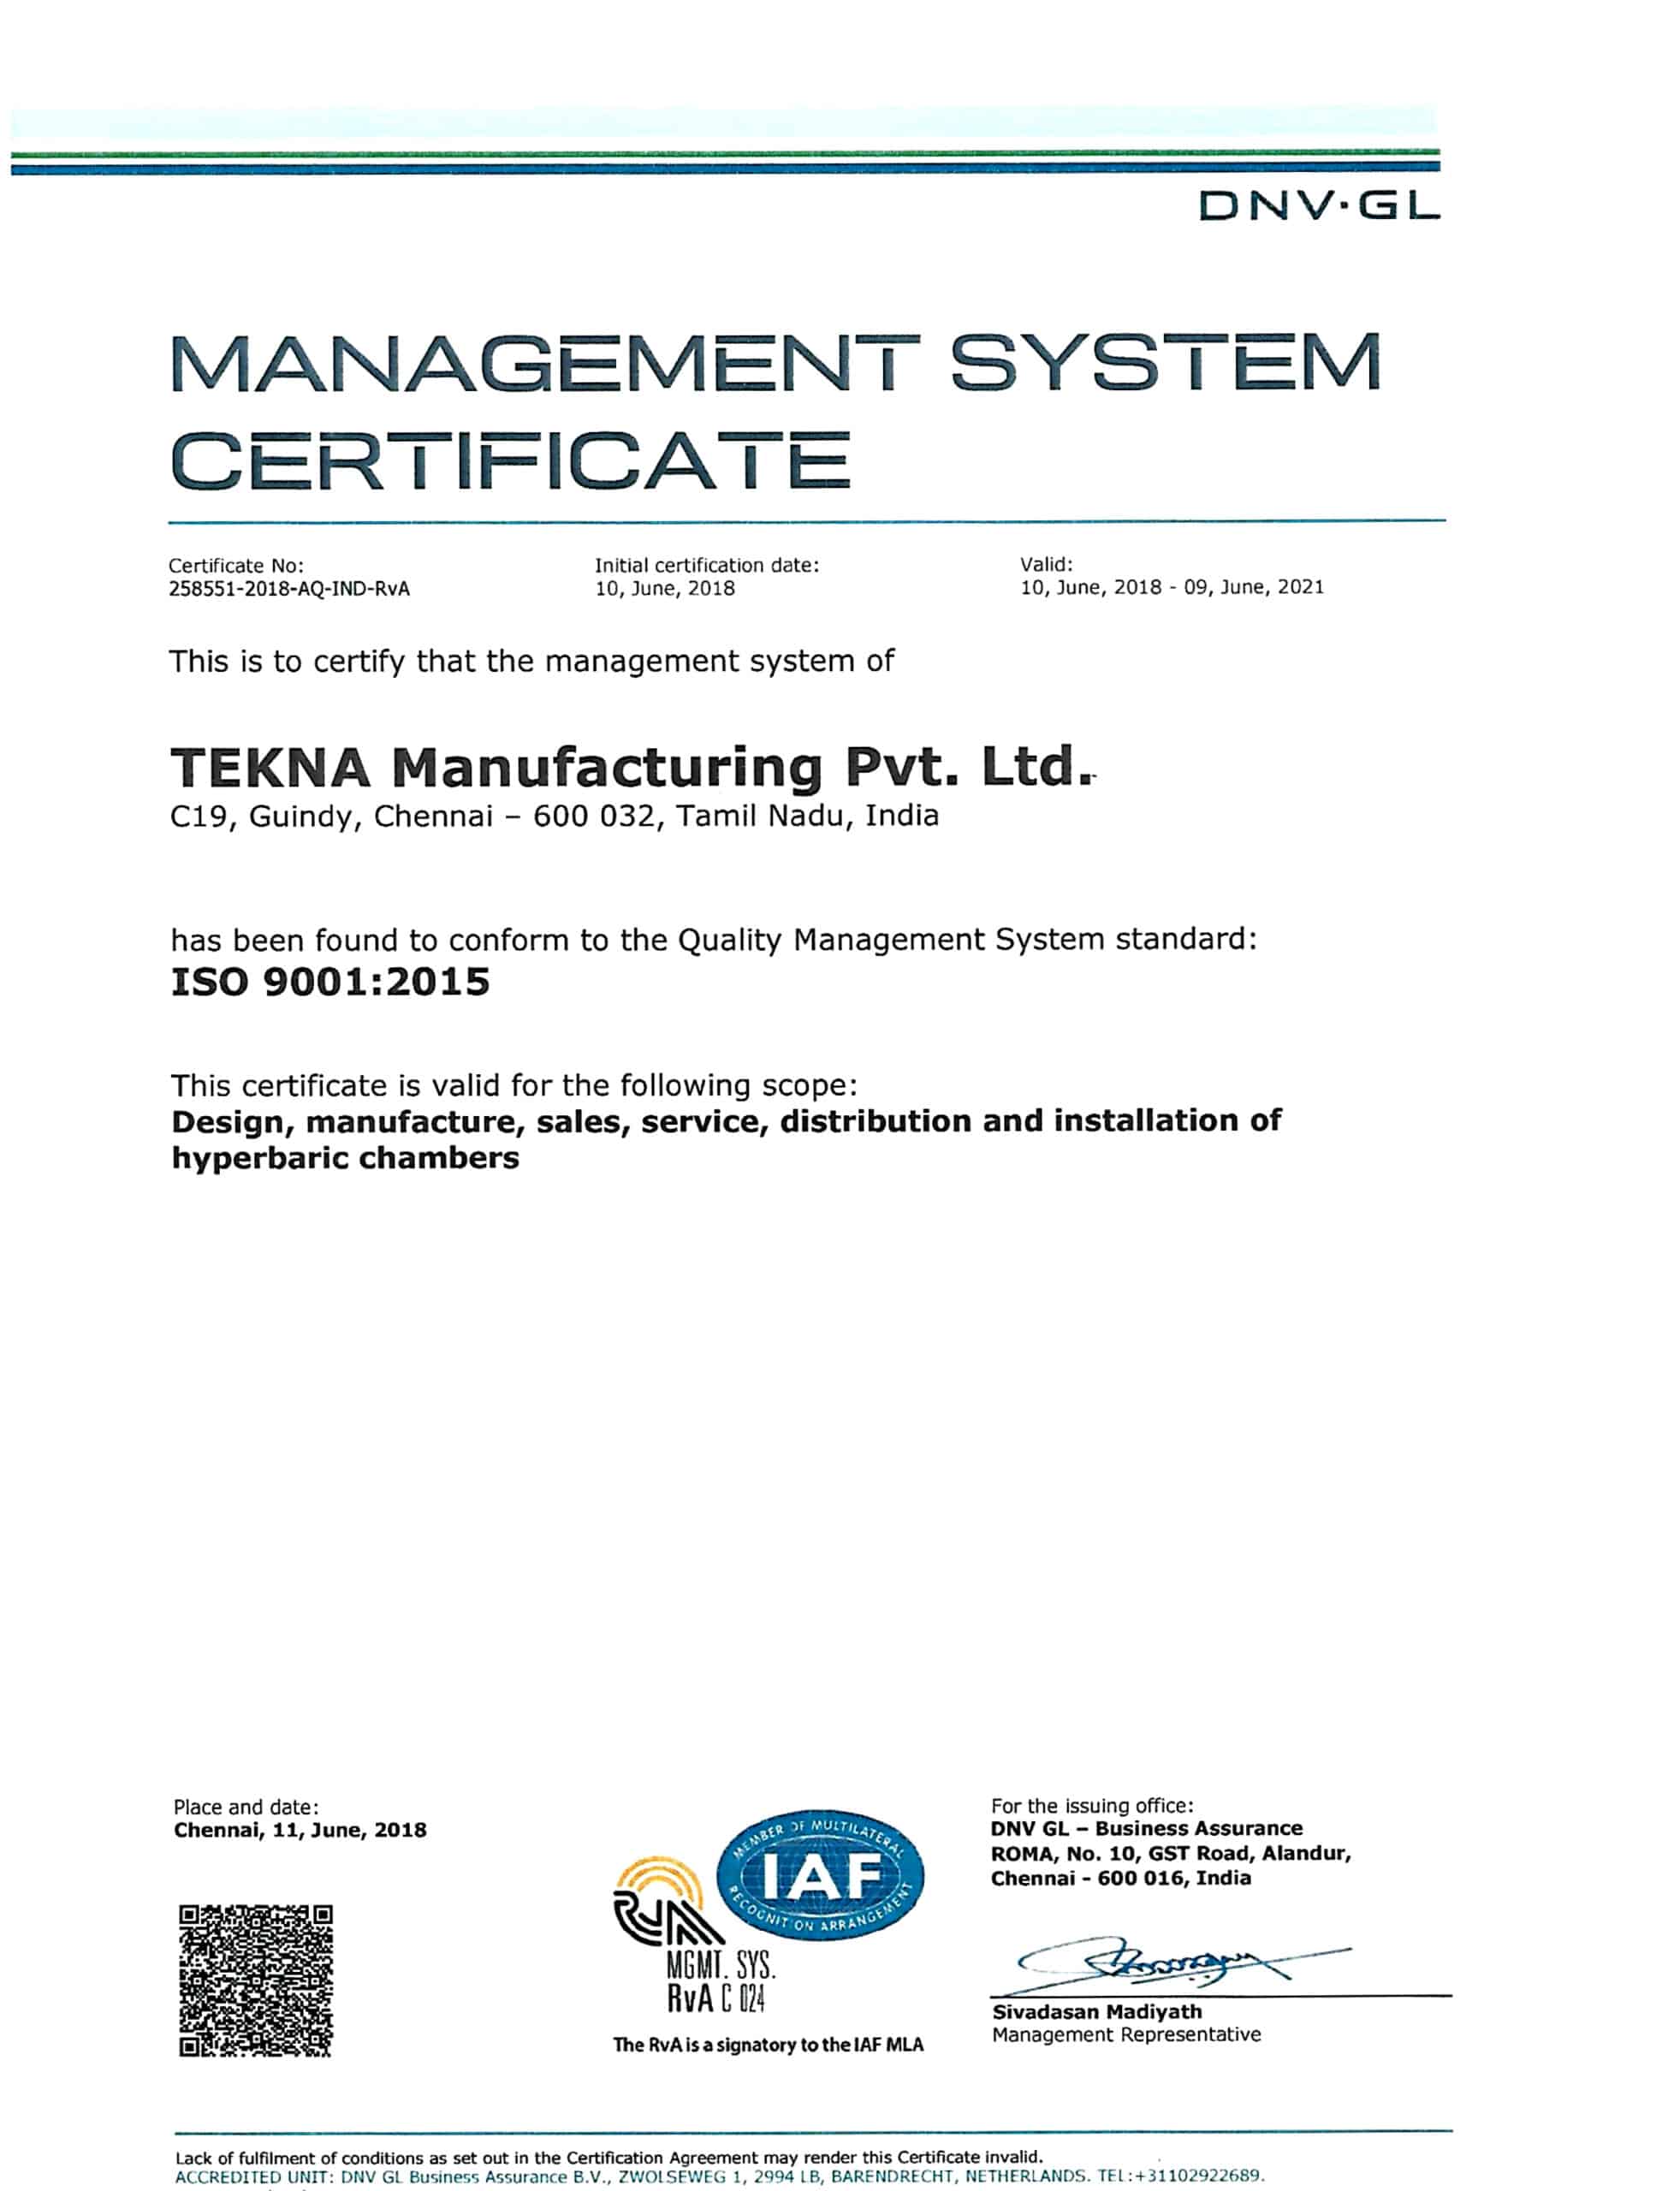 TEKNA MANUFACTURING ISO 9001-2015